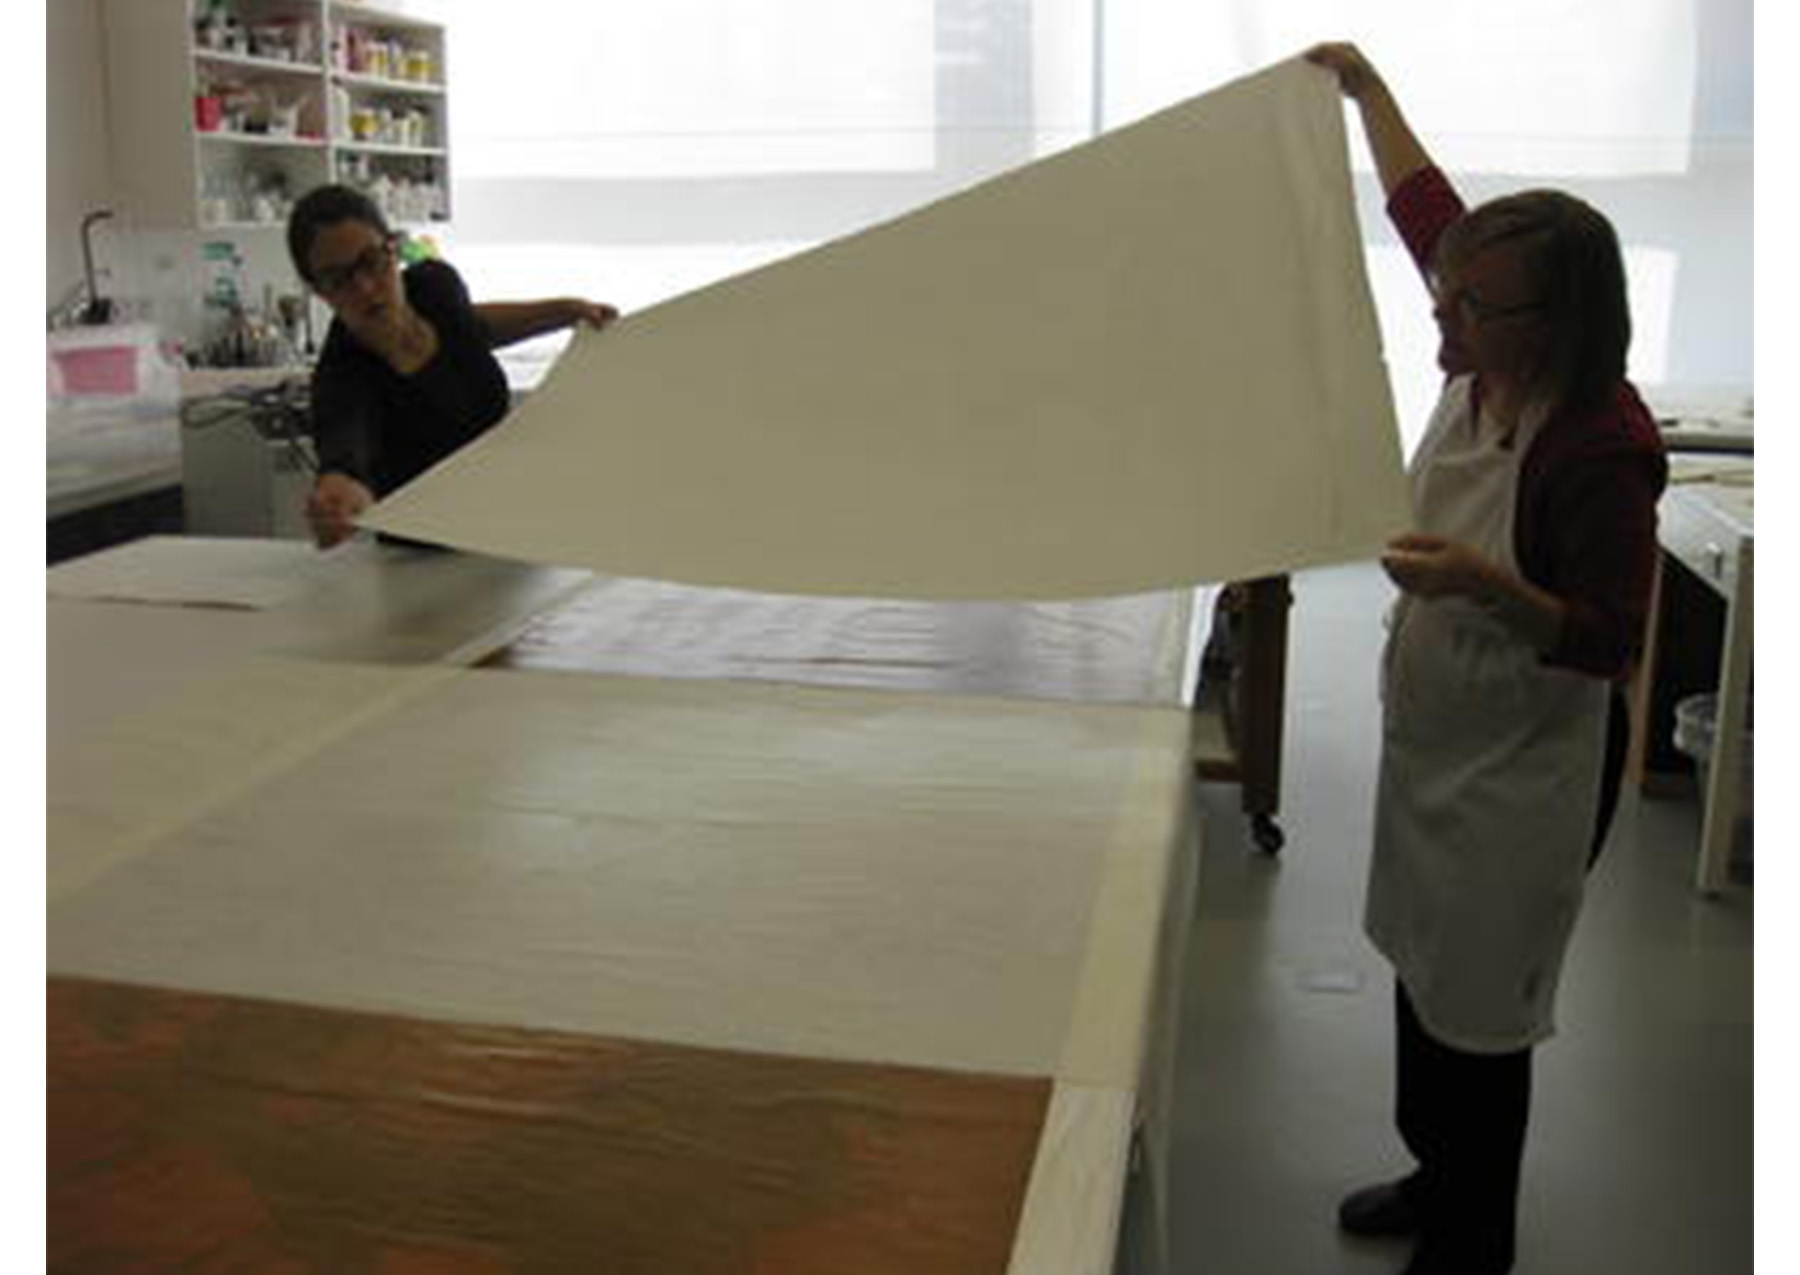 two woman hold a large sheet of paper over a white table with a poster spread across it